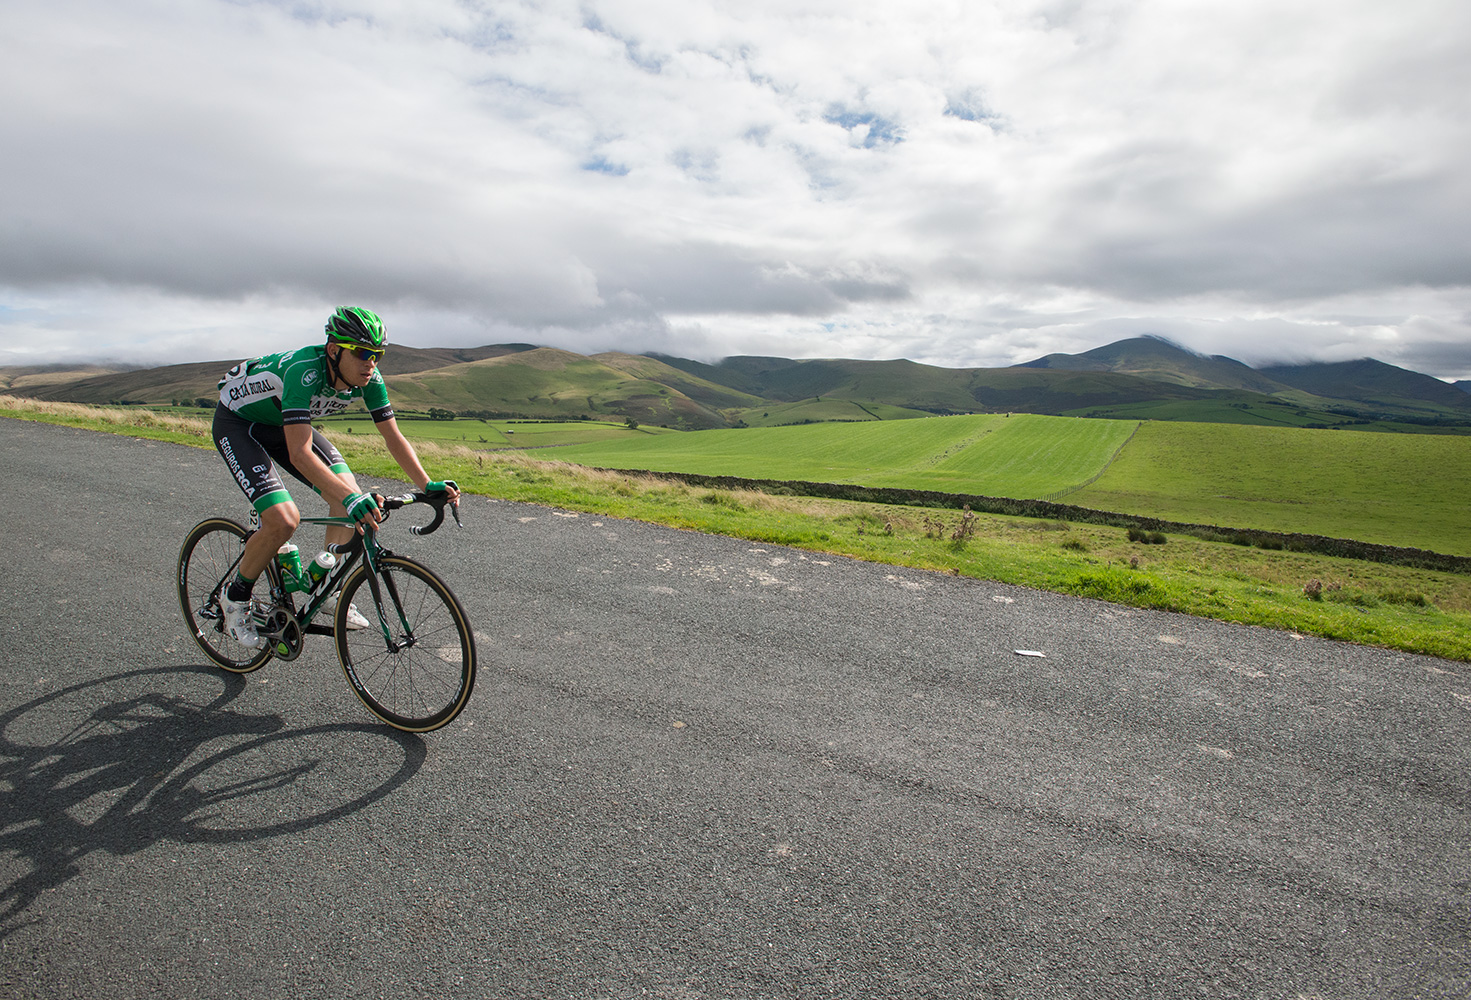 Miguel Angel BENITO DIEZ of team Caja Rural on Caldbeck Commons in Cumbria during Stage 2